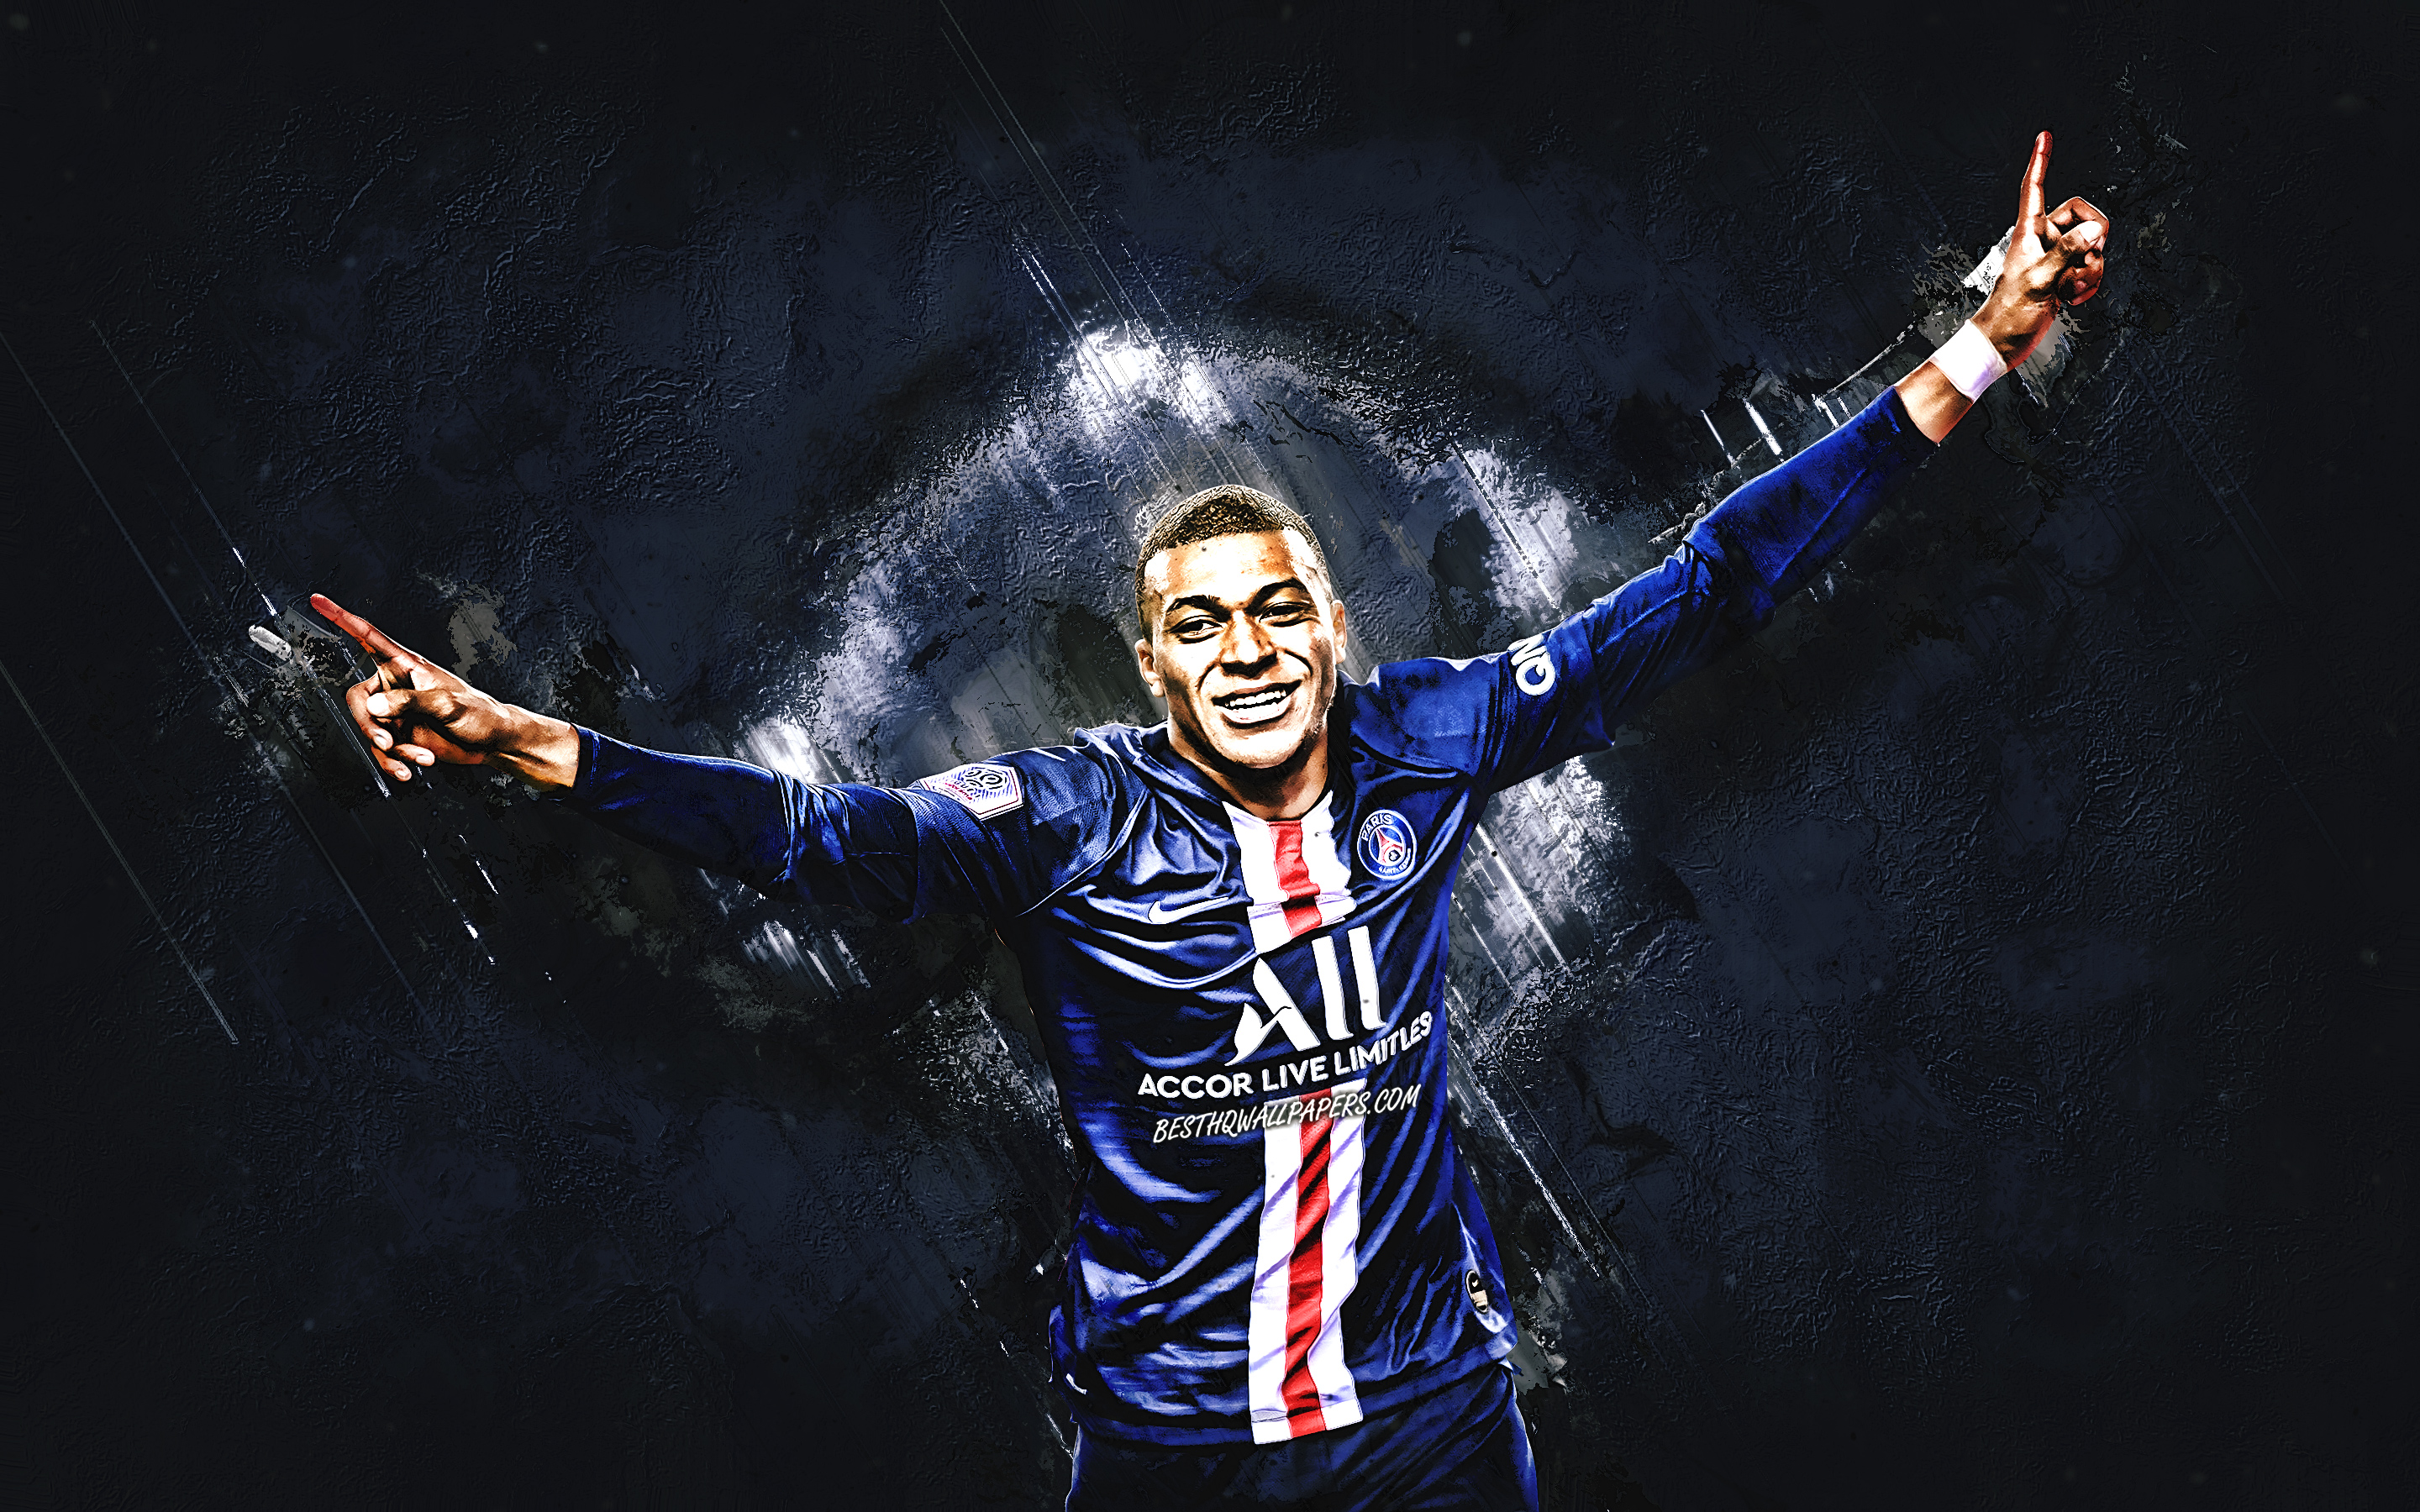 Download wallpapers Kylian Mbappe, PSG, football star, french soccer